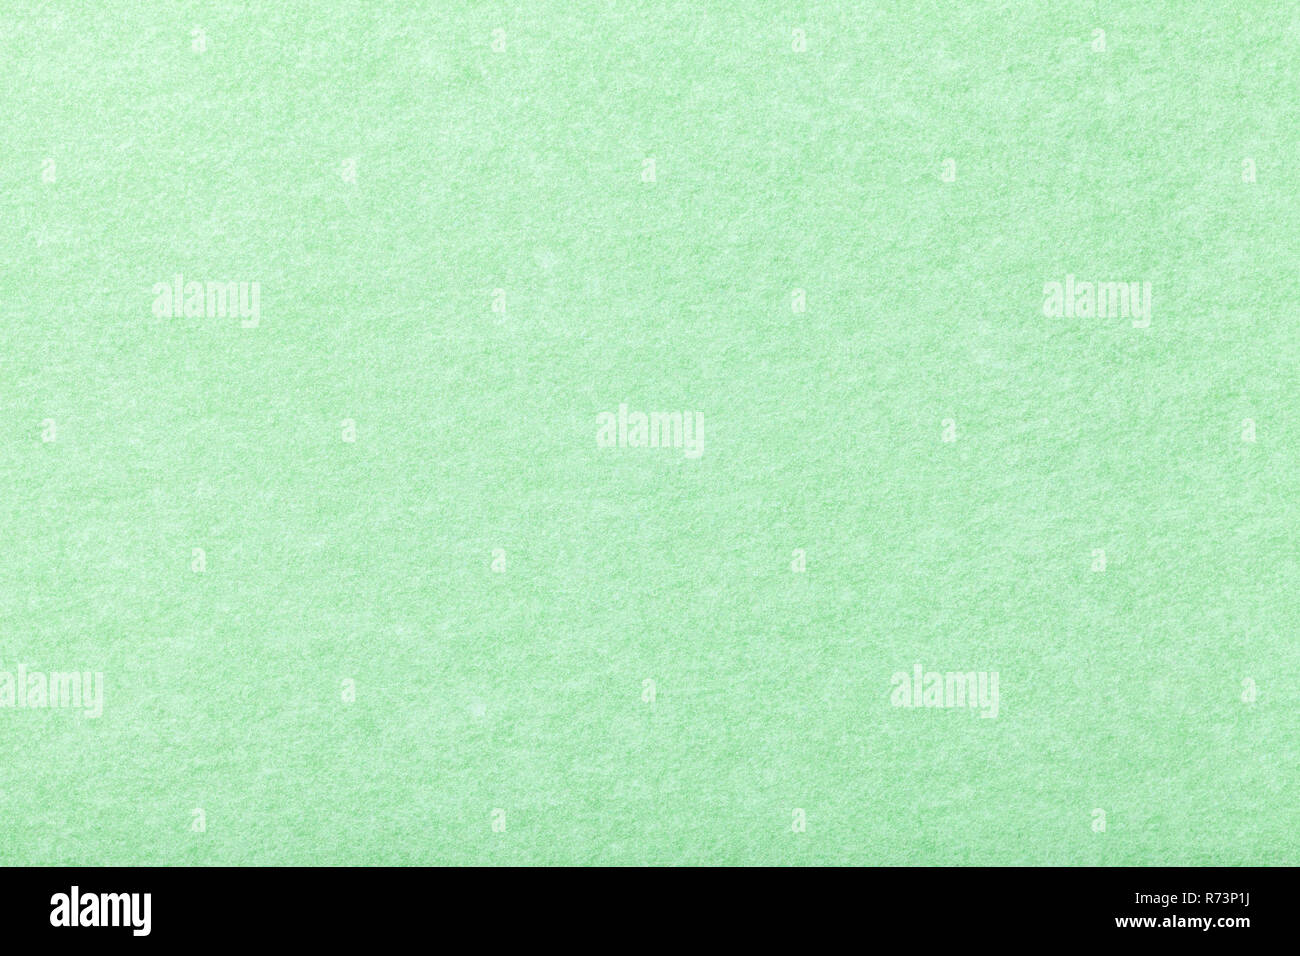 Colored Chalk stock photo. Image of green, angle, background